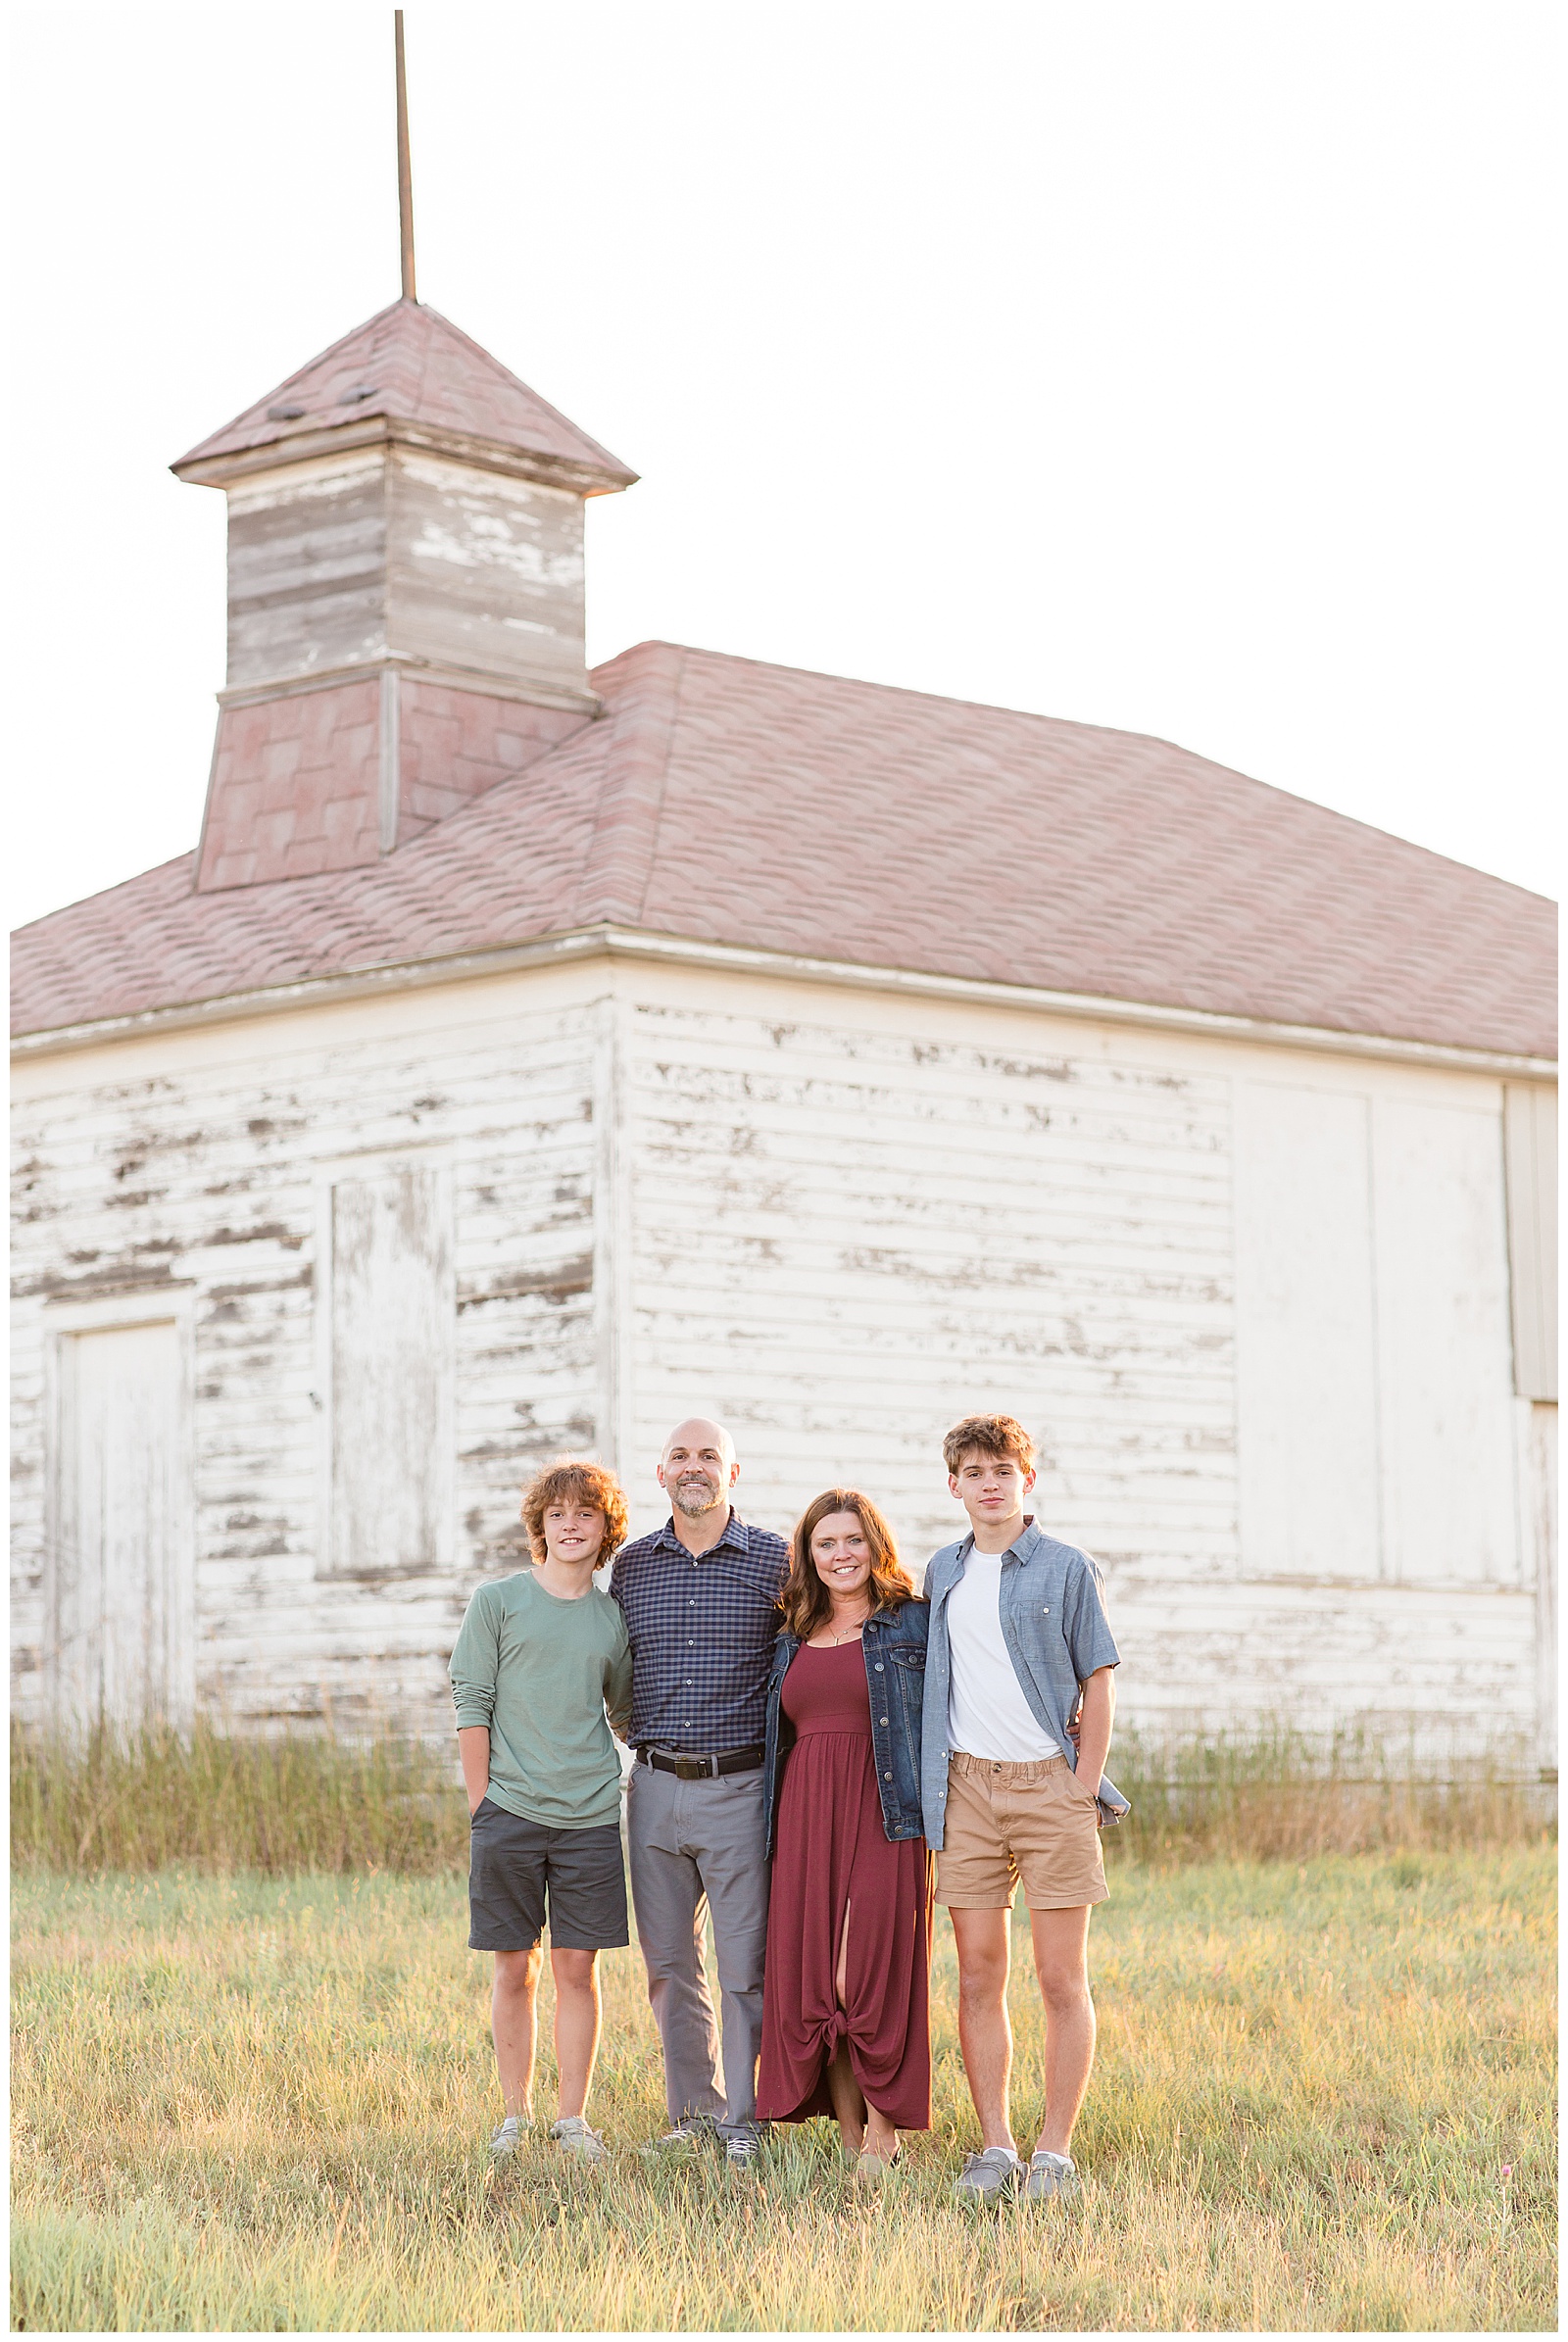 Family of 4, mom and dad, teen boys, stand in front of old building with that golden hour glow taken by Rebecca Rice Photography.